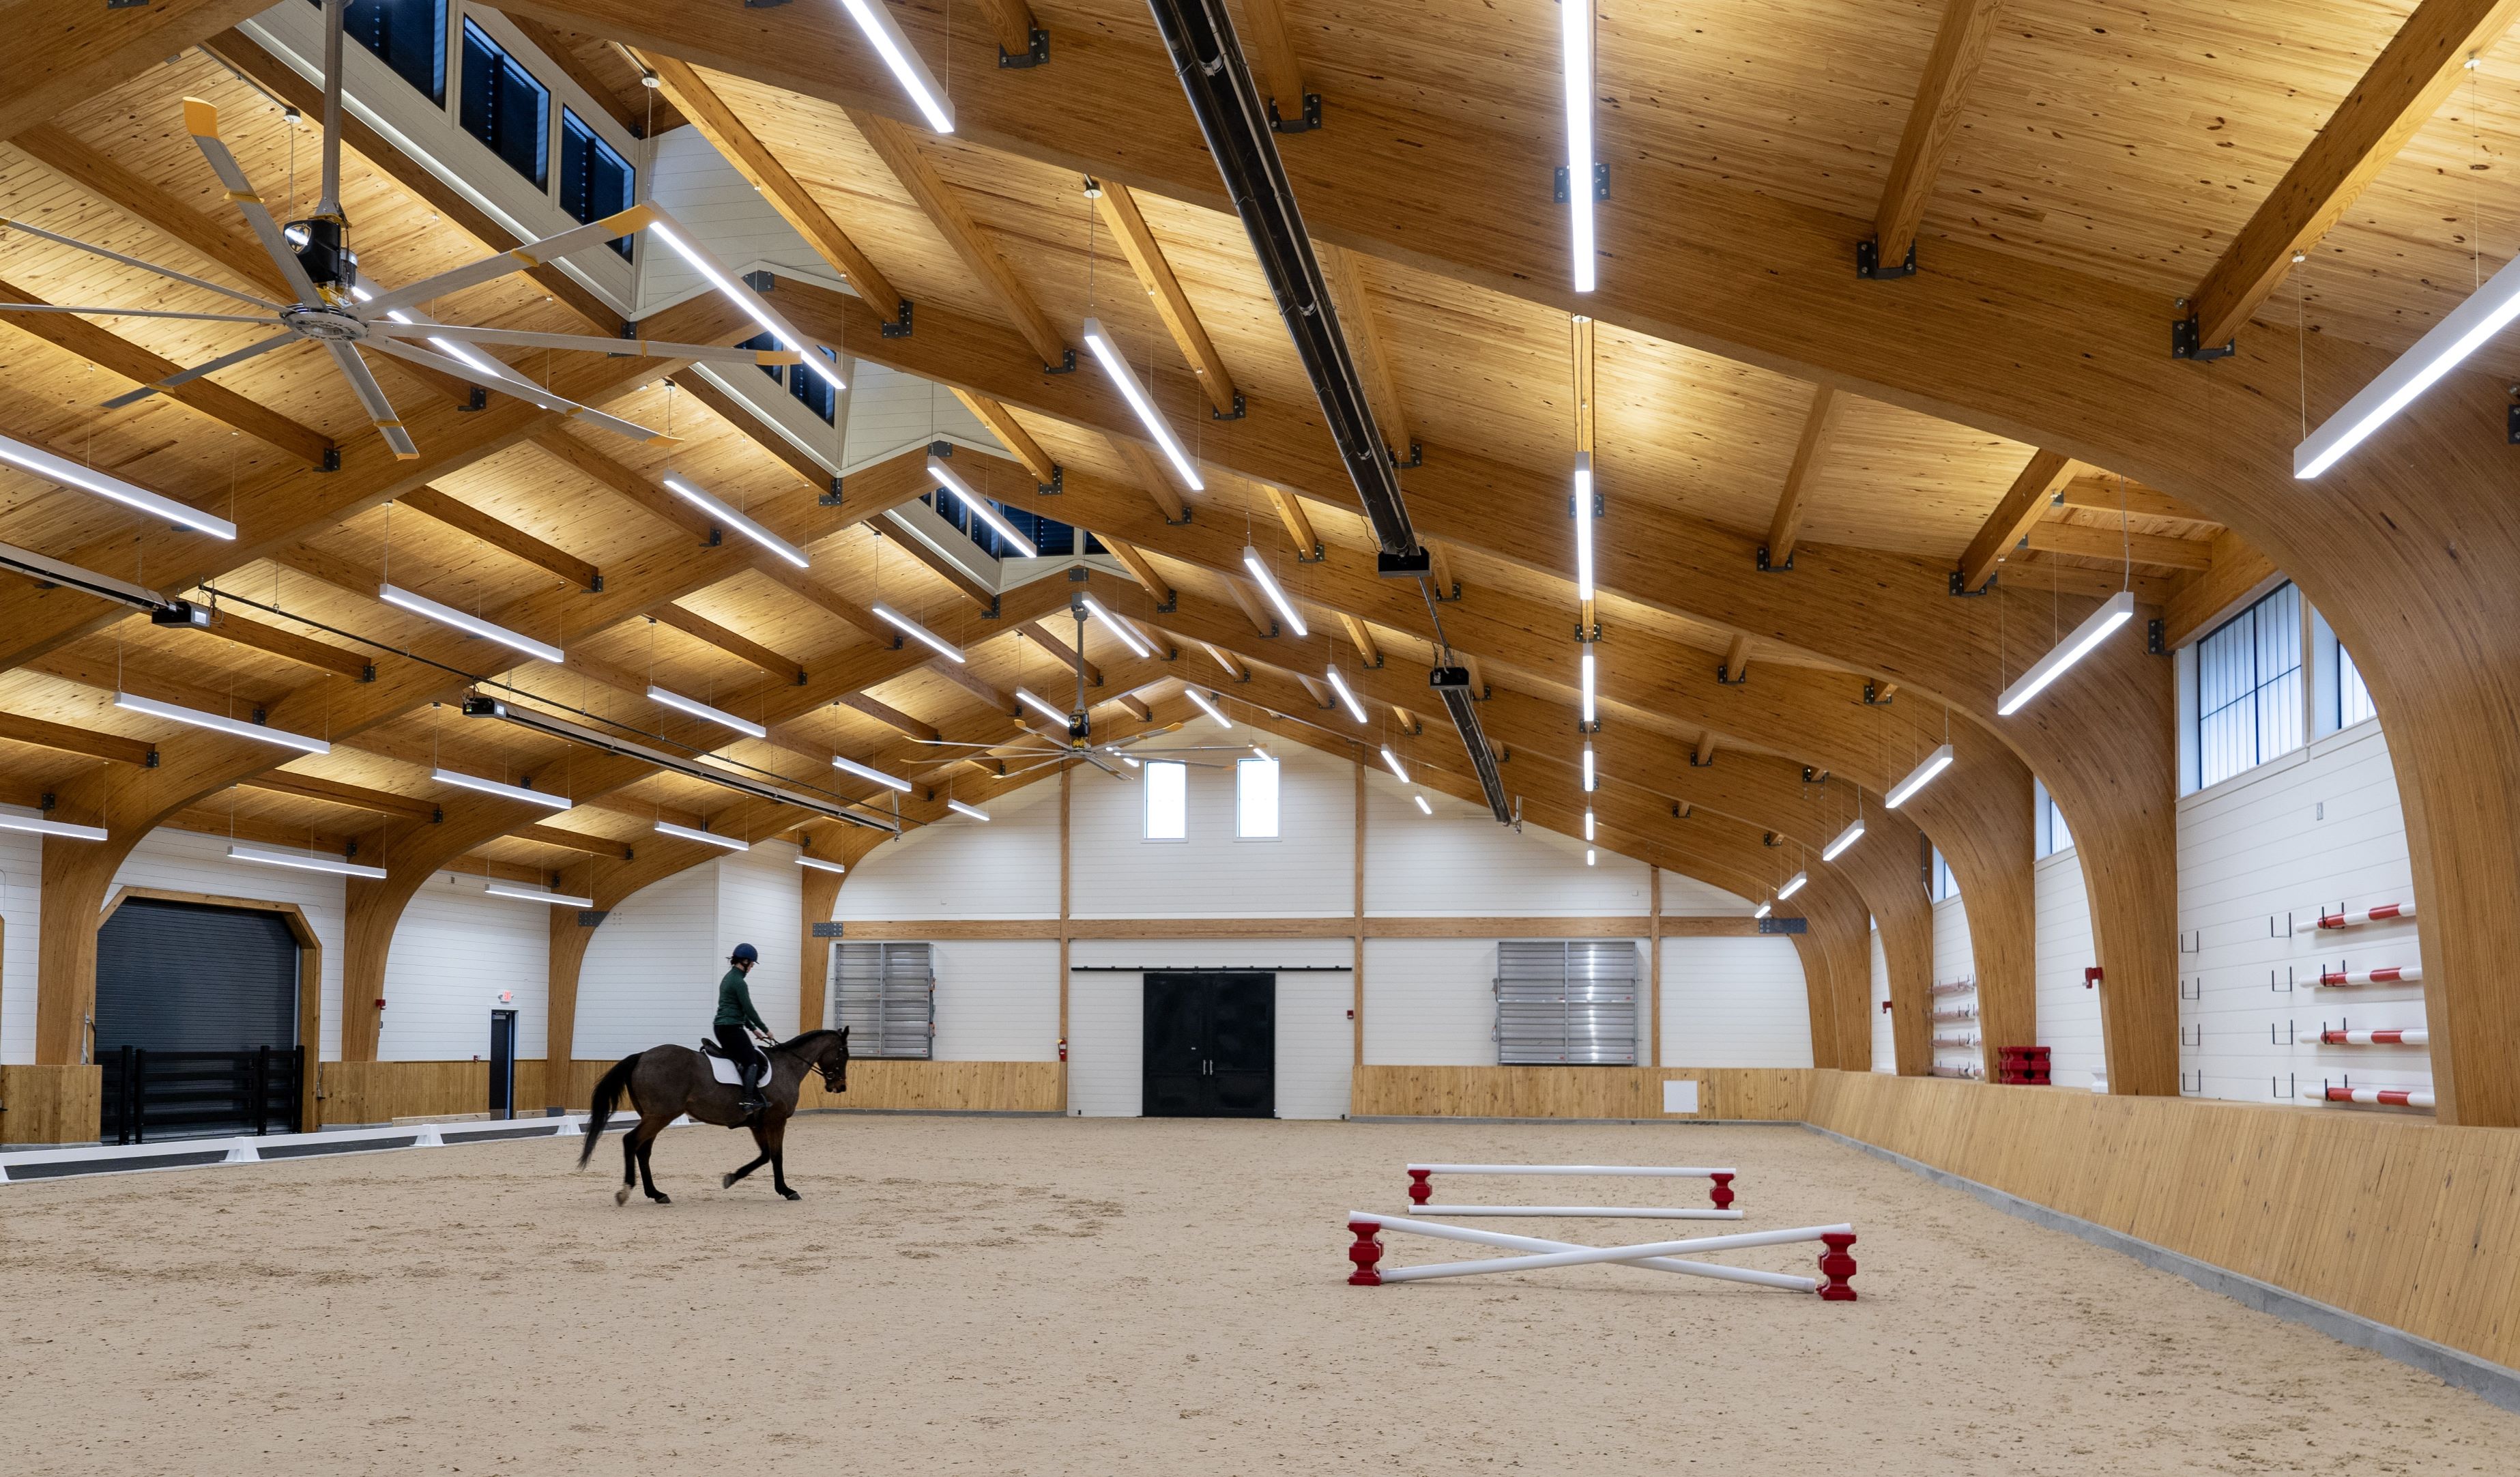 a horseback rider in the arena 